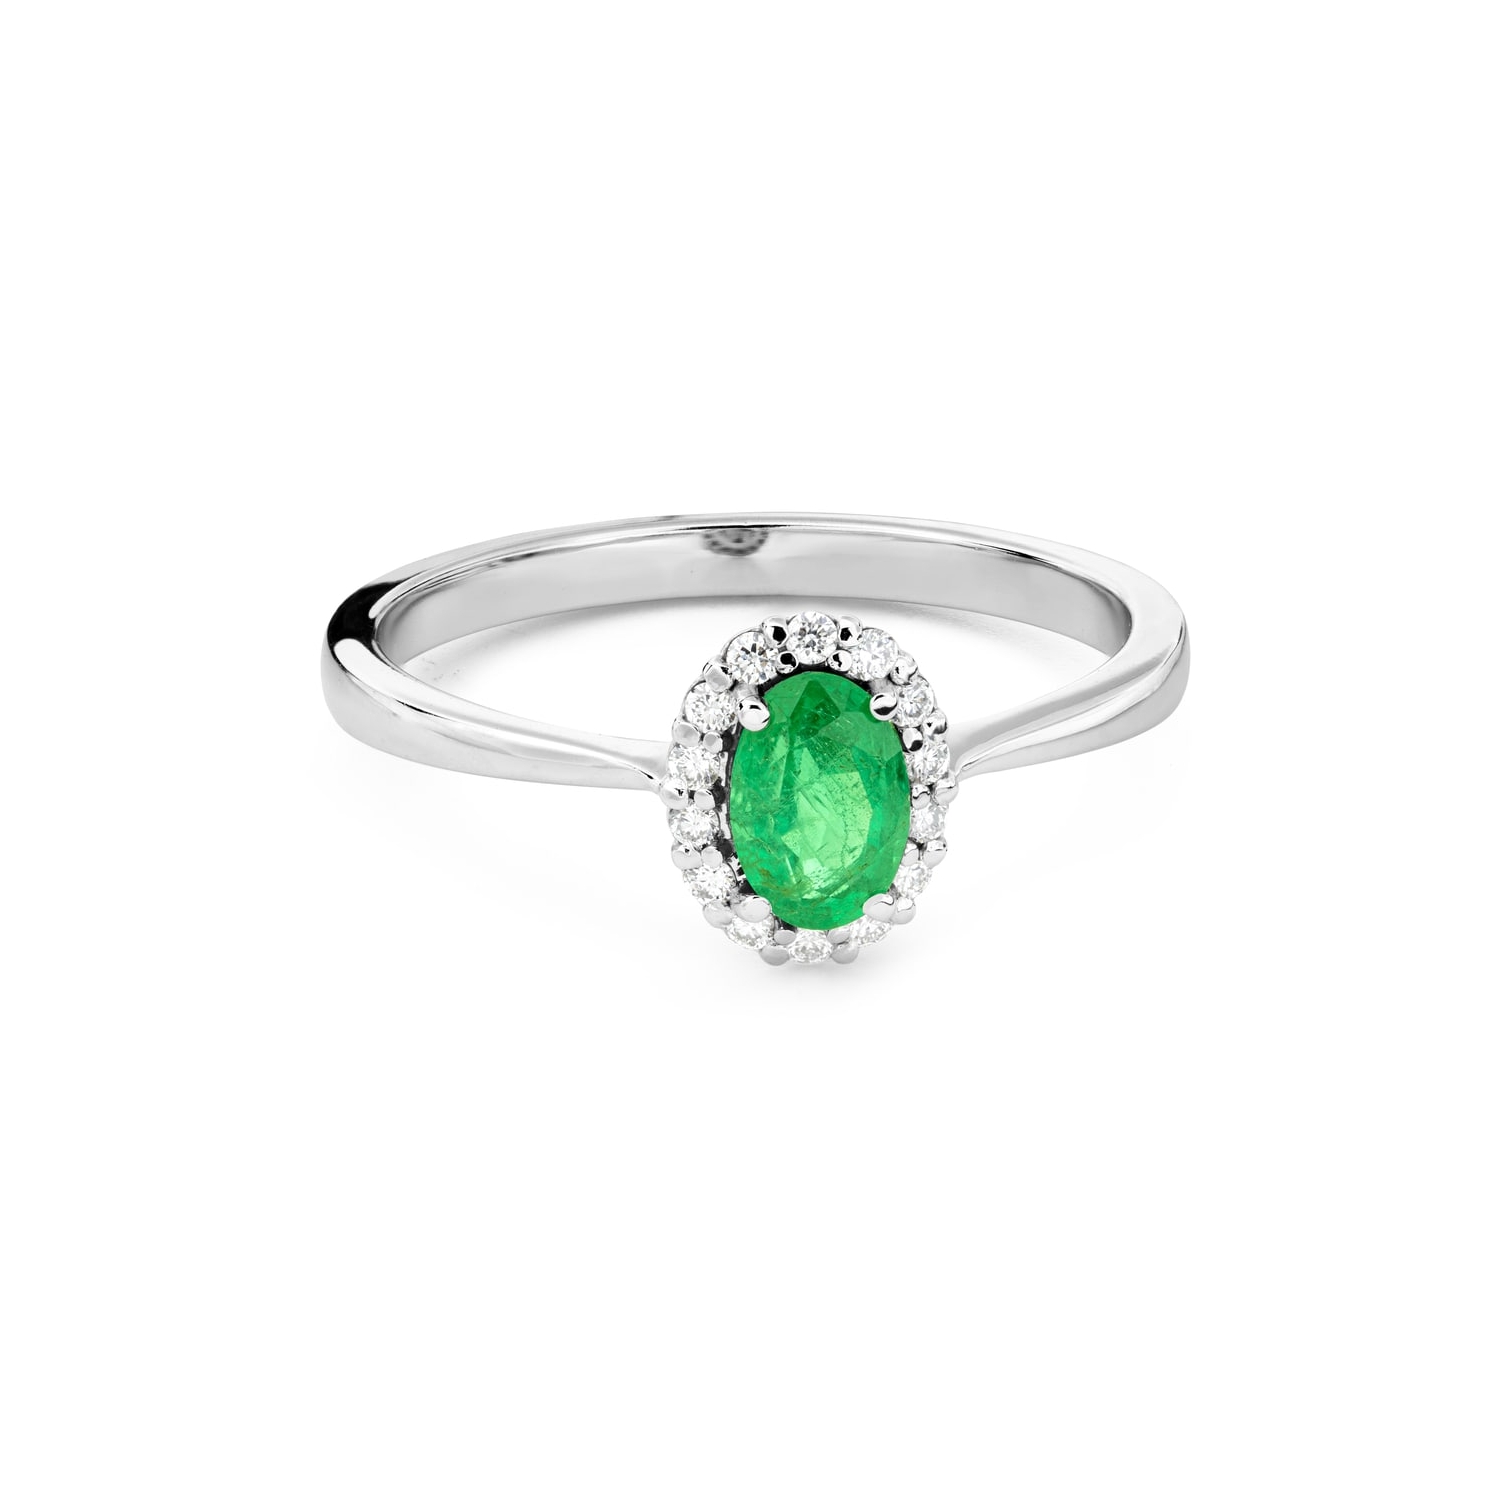 Engagement ring with gemstones "Emerald 70"